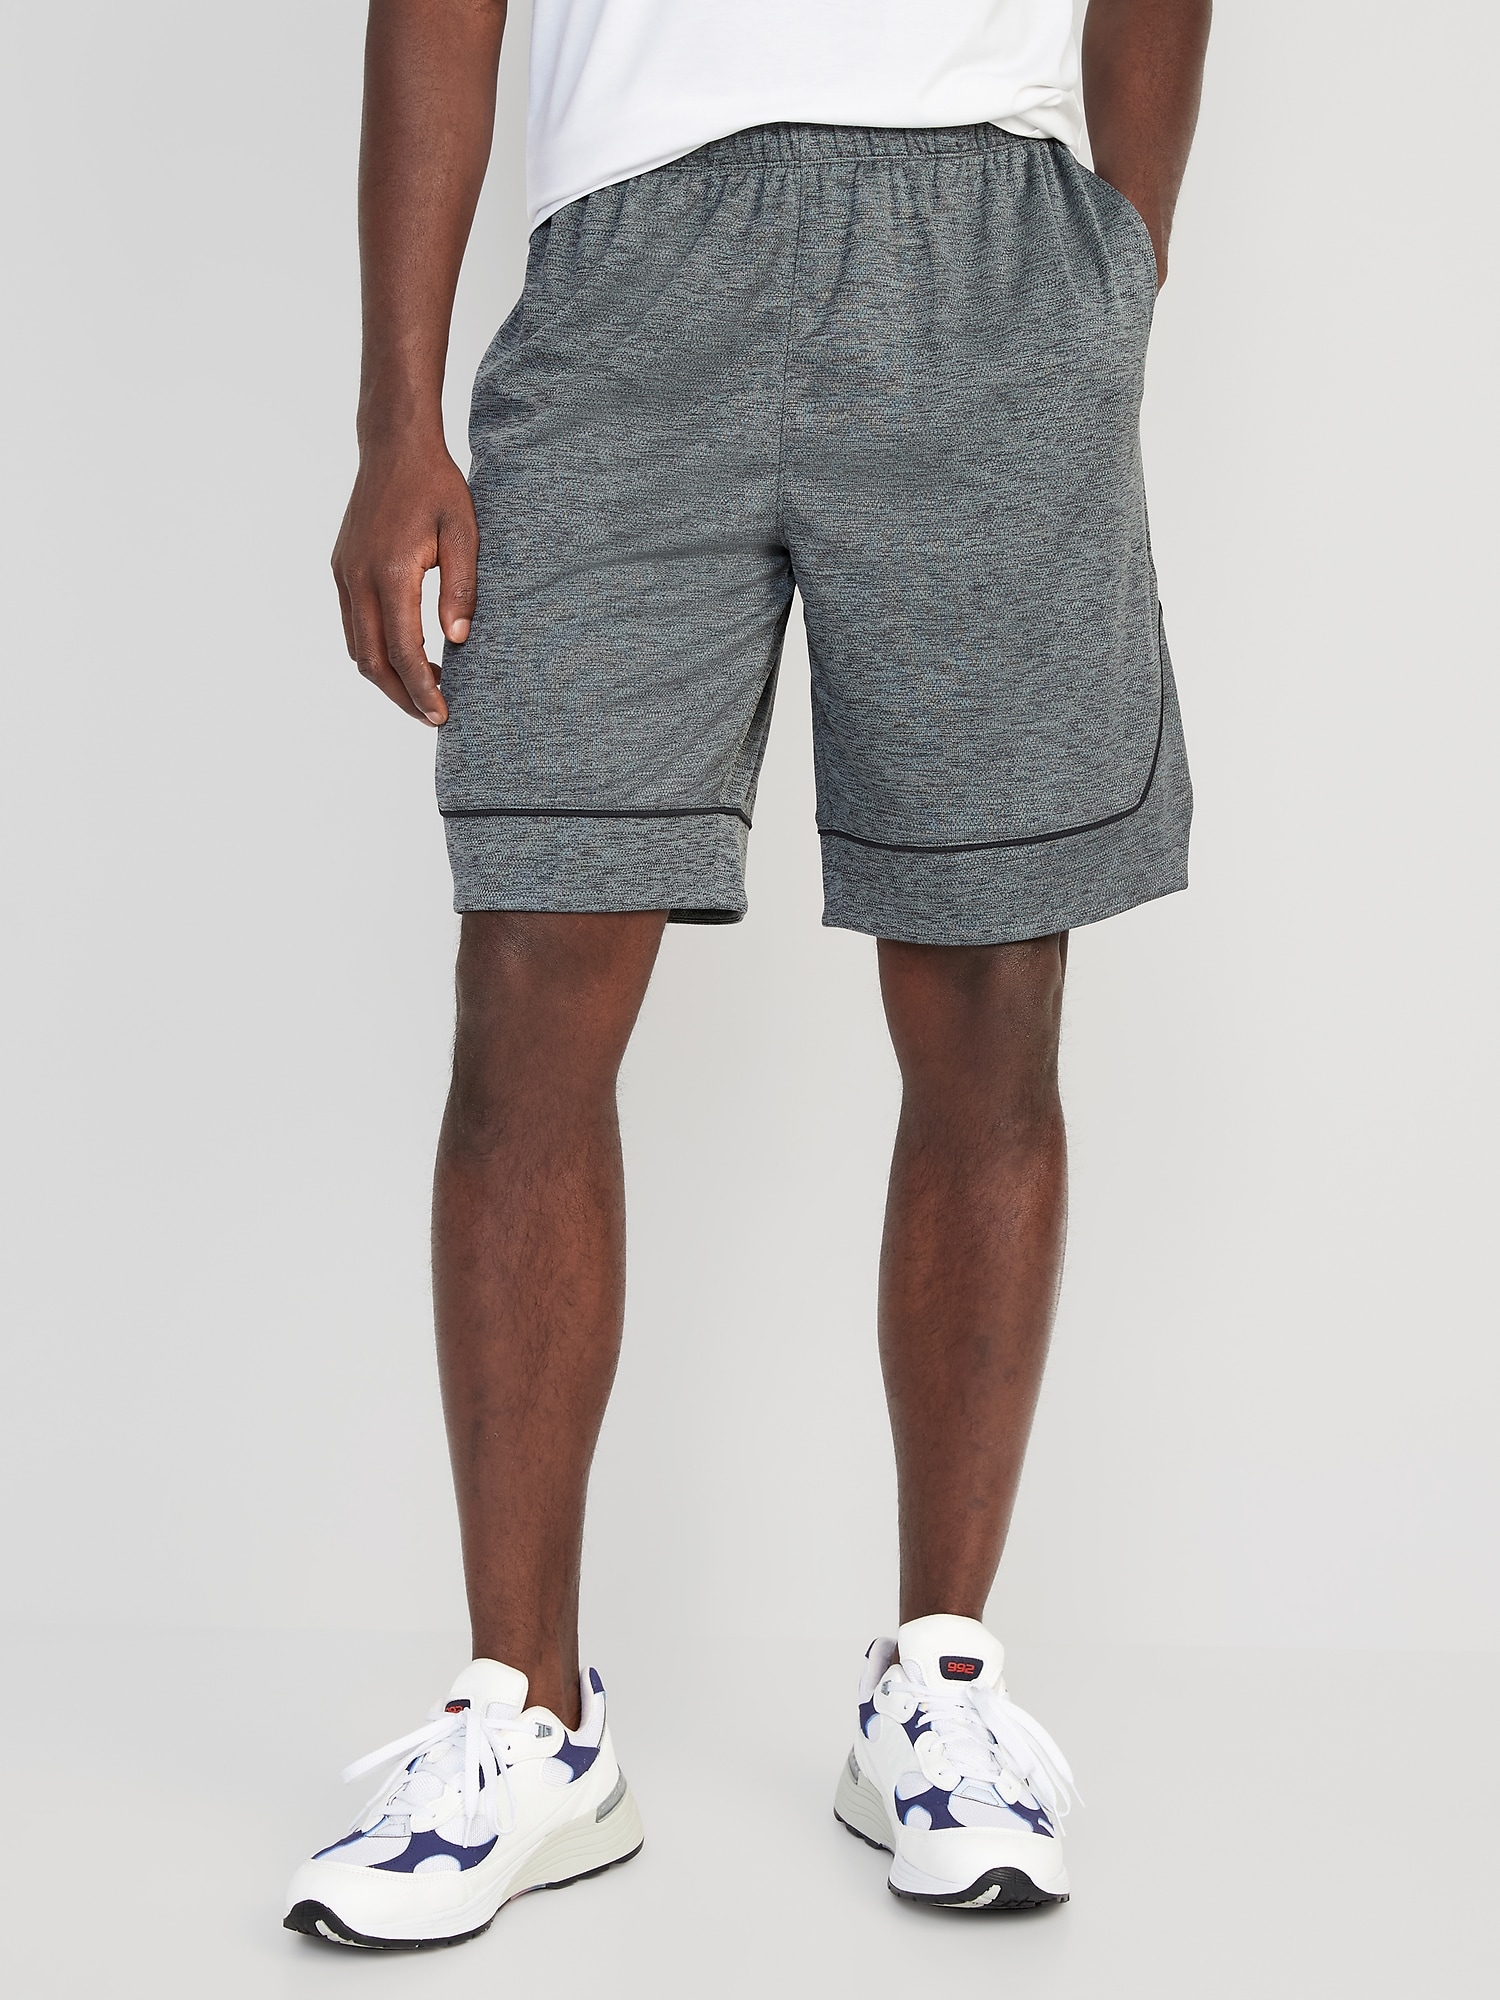 Dry-Fit Shorts | Old Navy